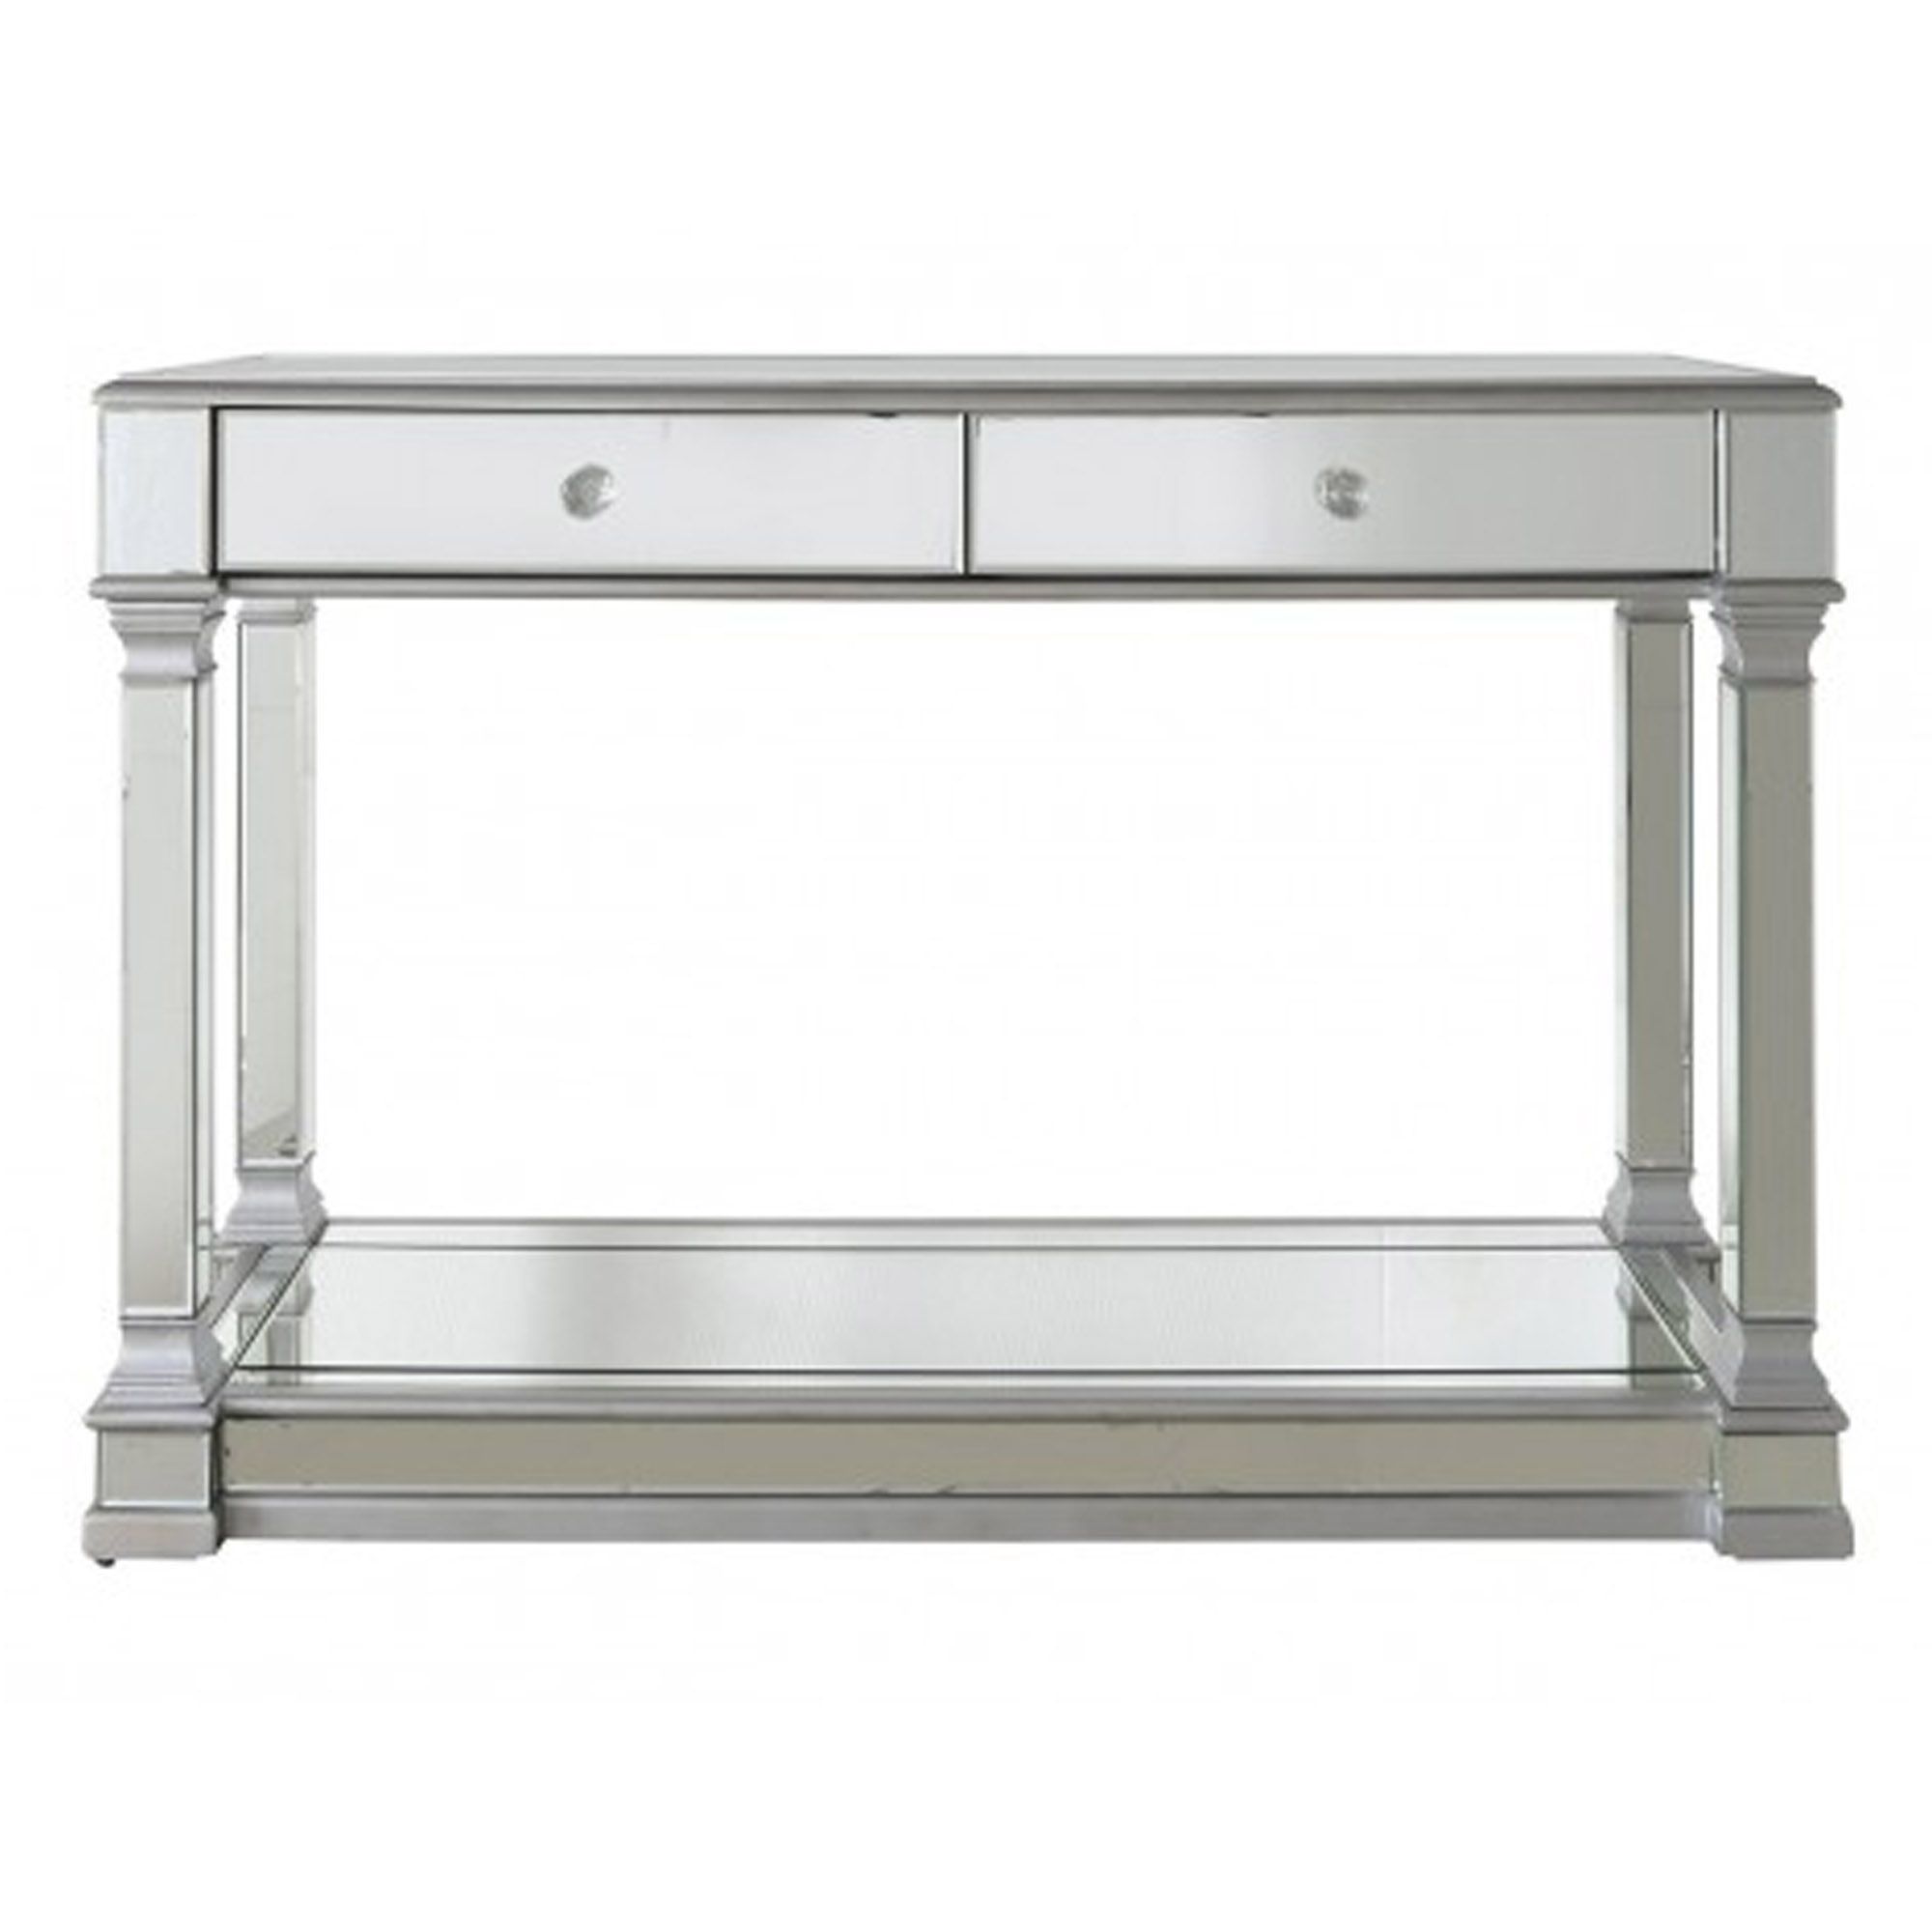 Livorno Silver Mirrored 2 Drawer Console Table | Contemporary Furniture With Regard To Silver Console Tables (View 17 of 20)